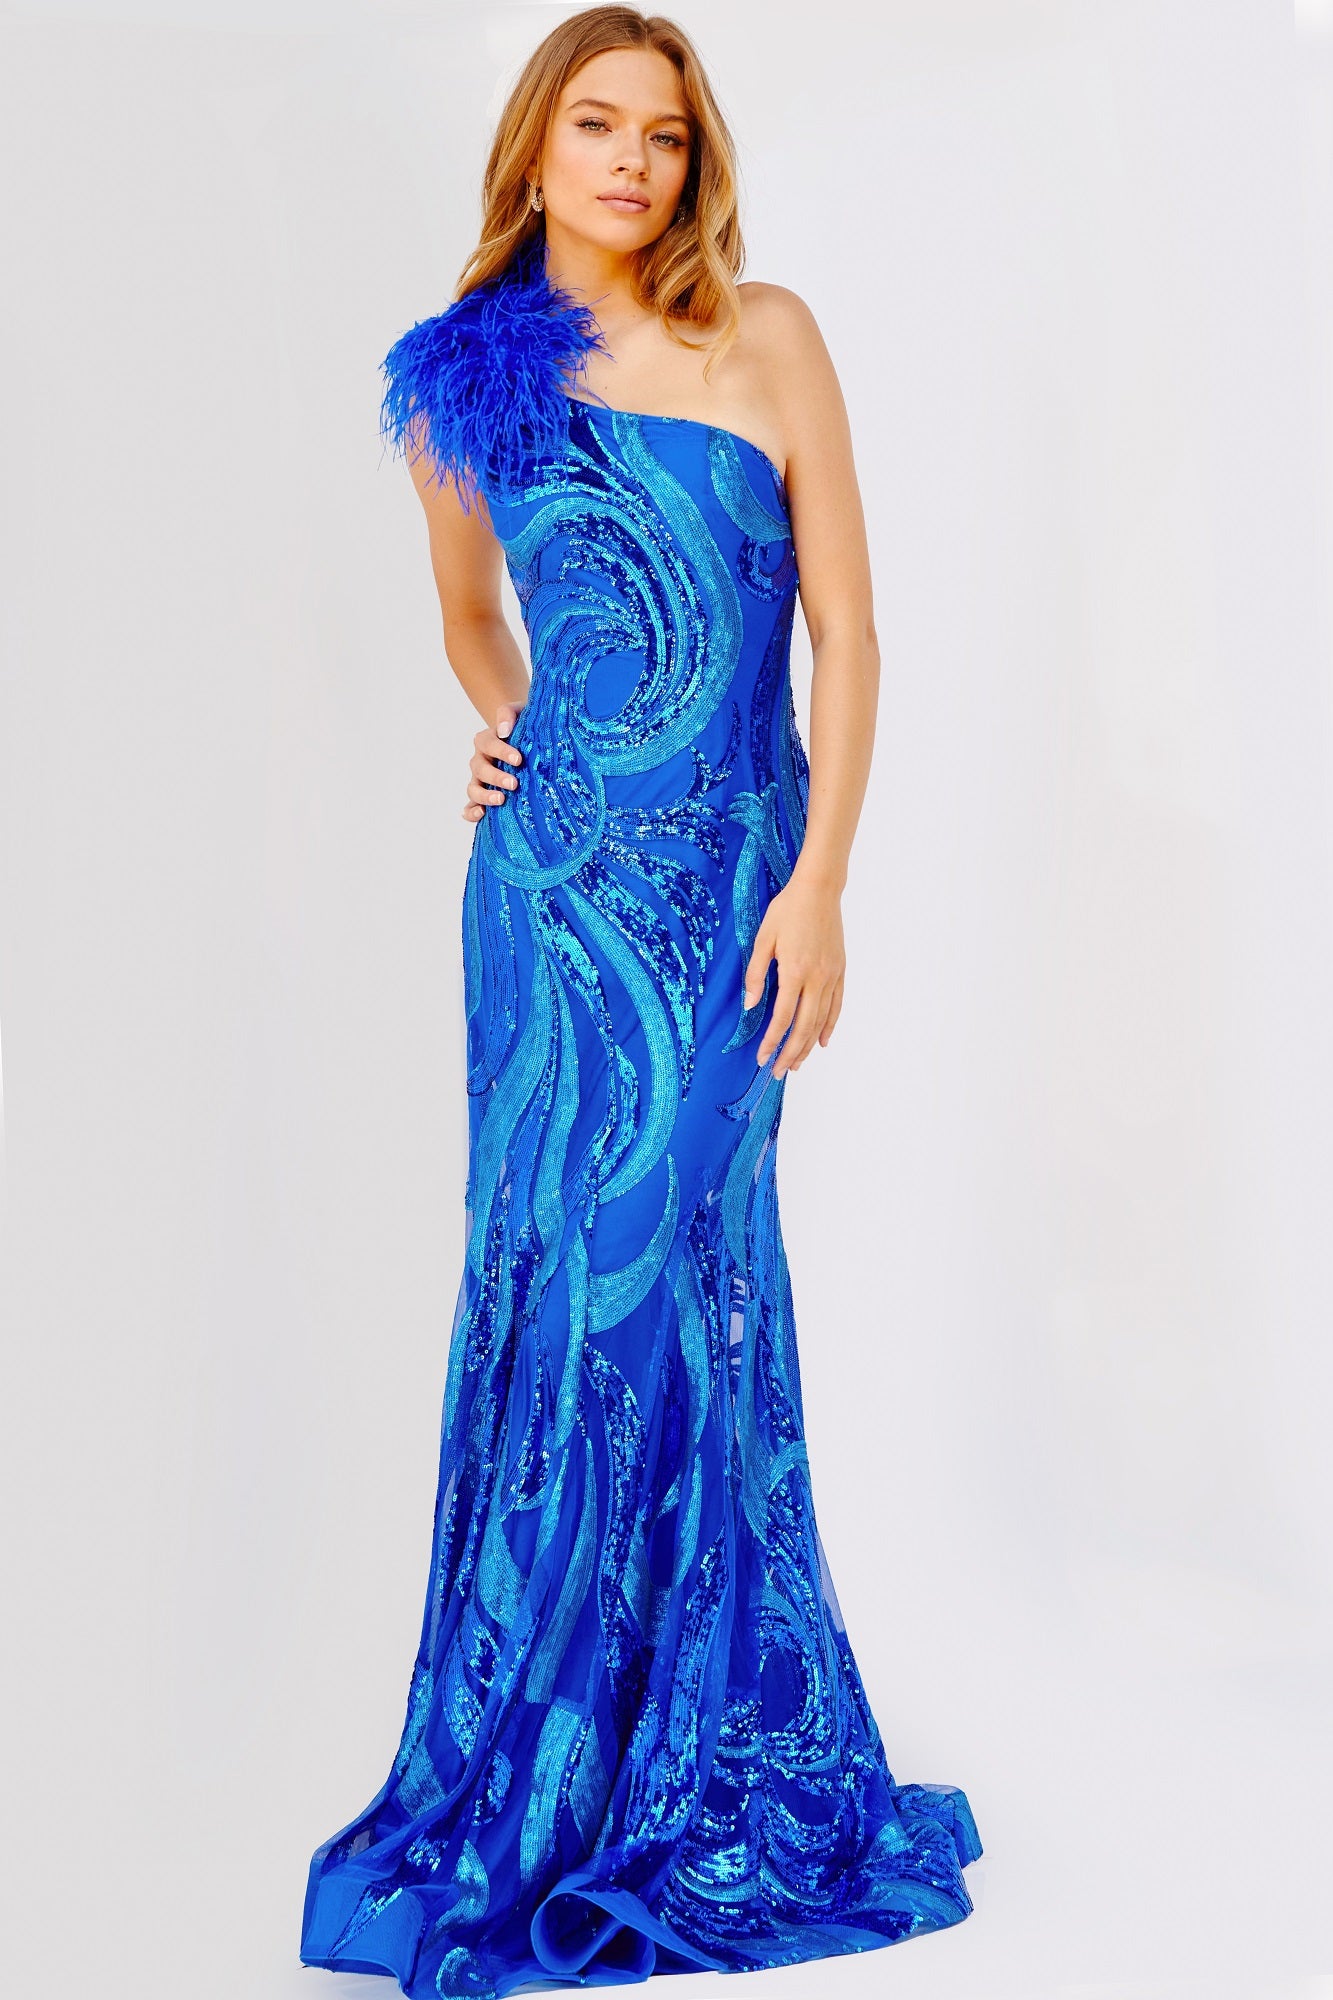 Jovani 32596 This exquisite prom dress features form-fitting sequin embellishments, a floor-length skirt with a sweeping train, and a one-shoulder feather strap for a dazzling look.